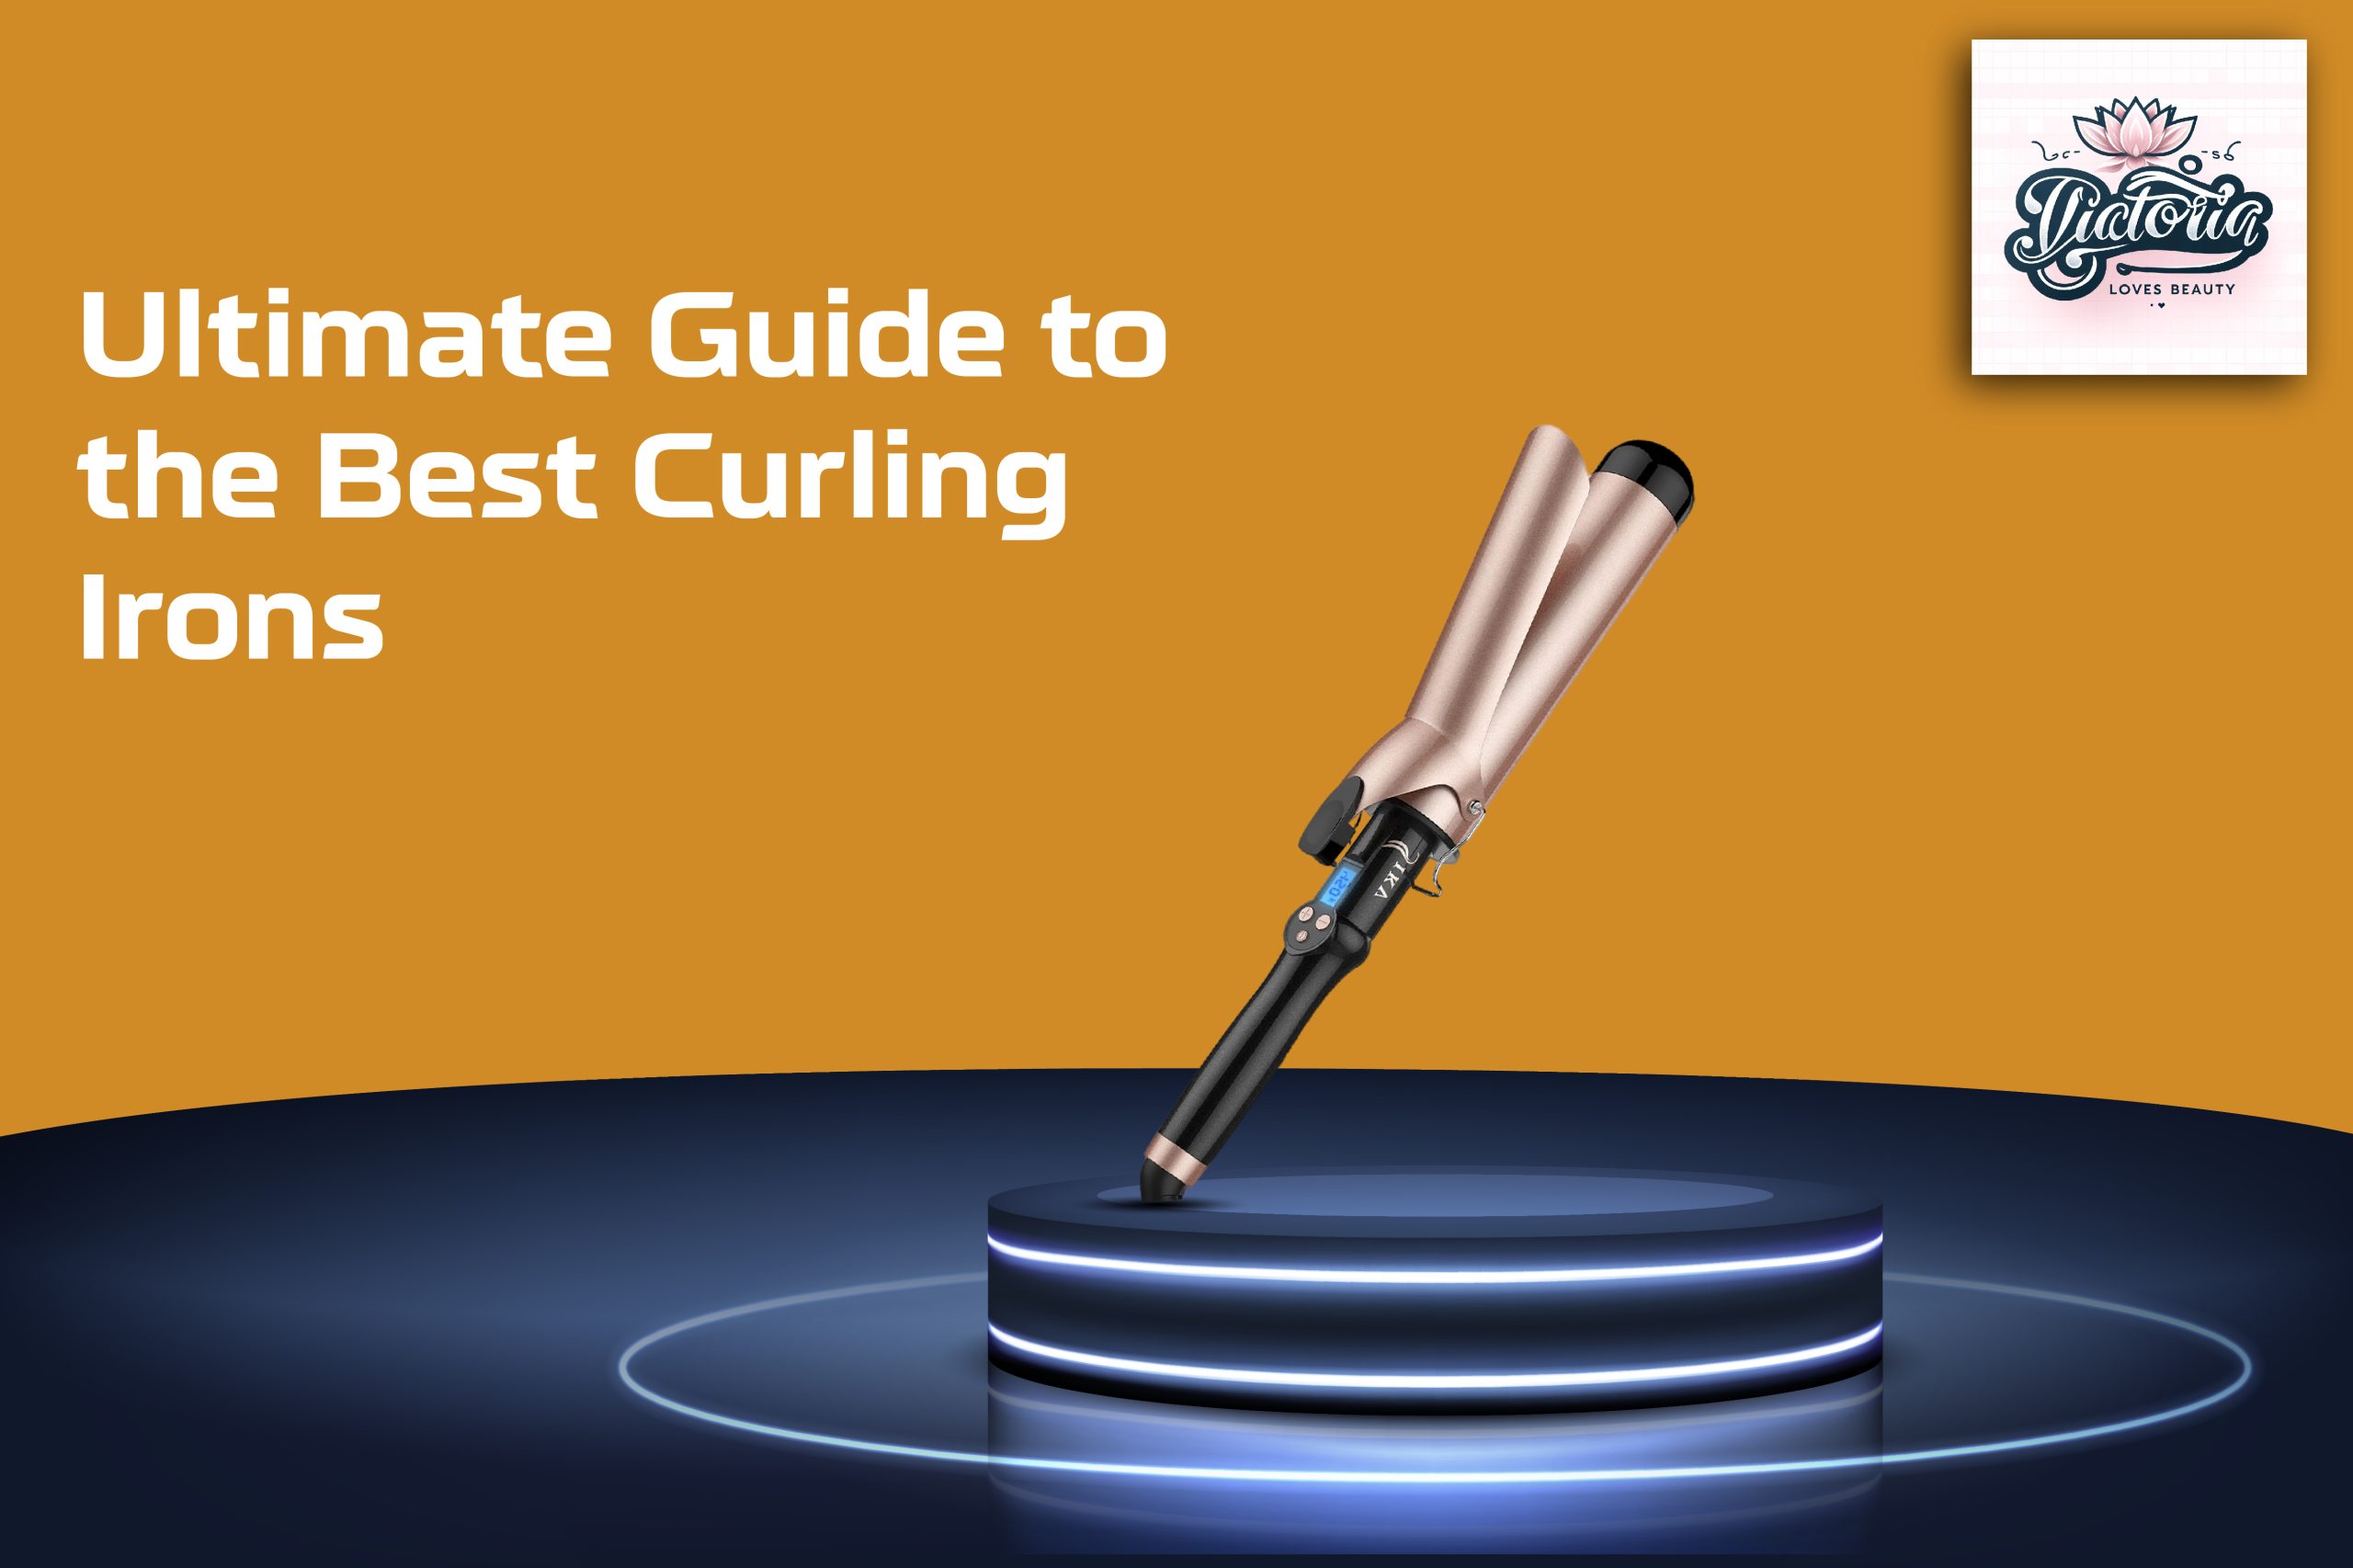 Ultimate Guide to the Best Curling Irons